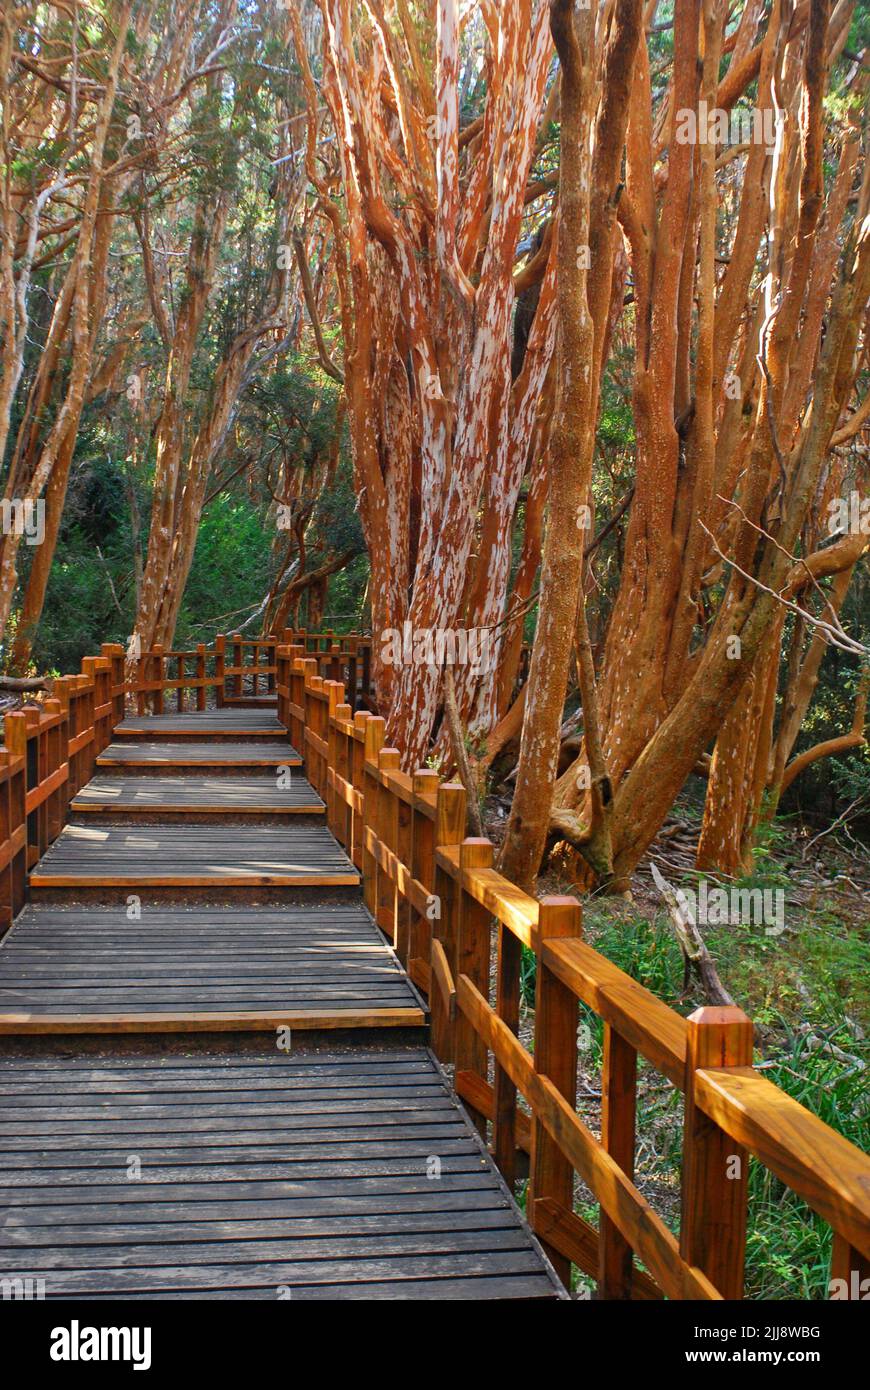 Wooden trail in Arrayanes National Park, Villa la Angostura, Argentina. A forest with orange-colored trees, the place that inspired Walt Disney. Stock Photo